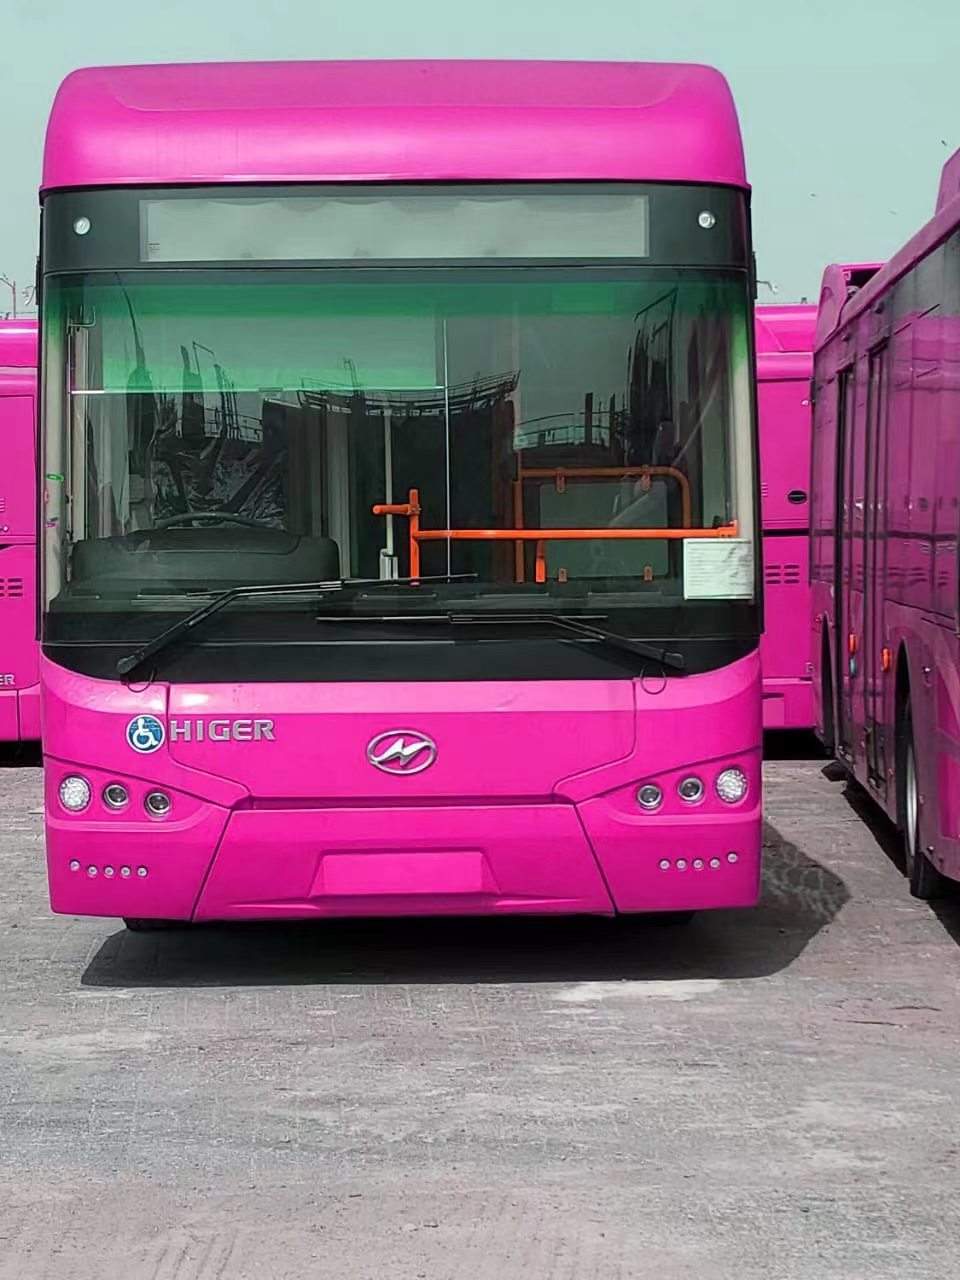 Higer’s pink buses to start operation from 1st Feb in Karachi